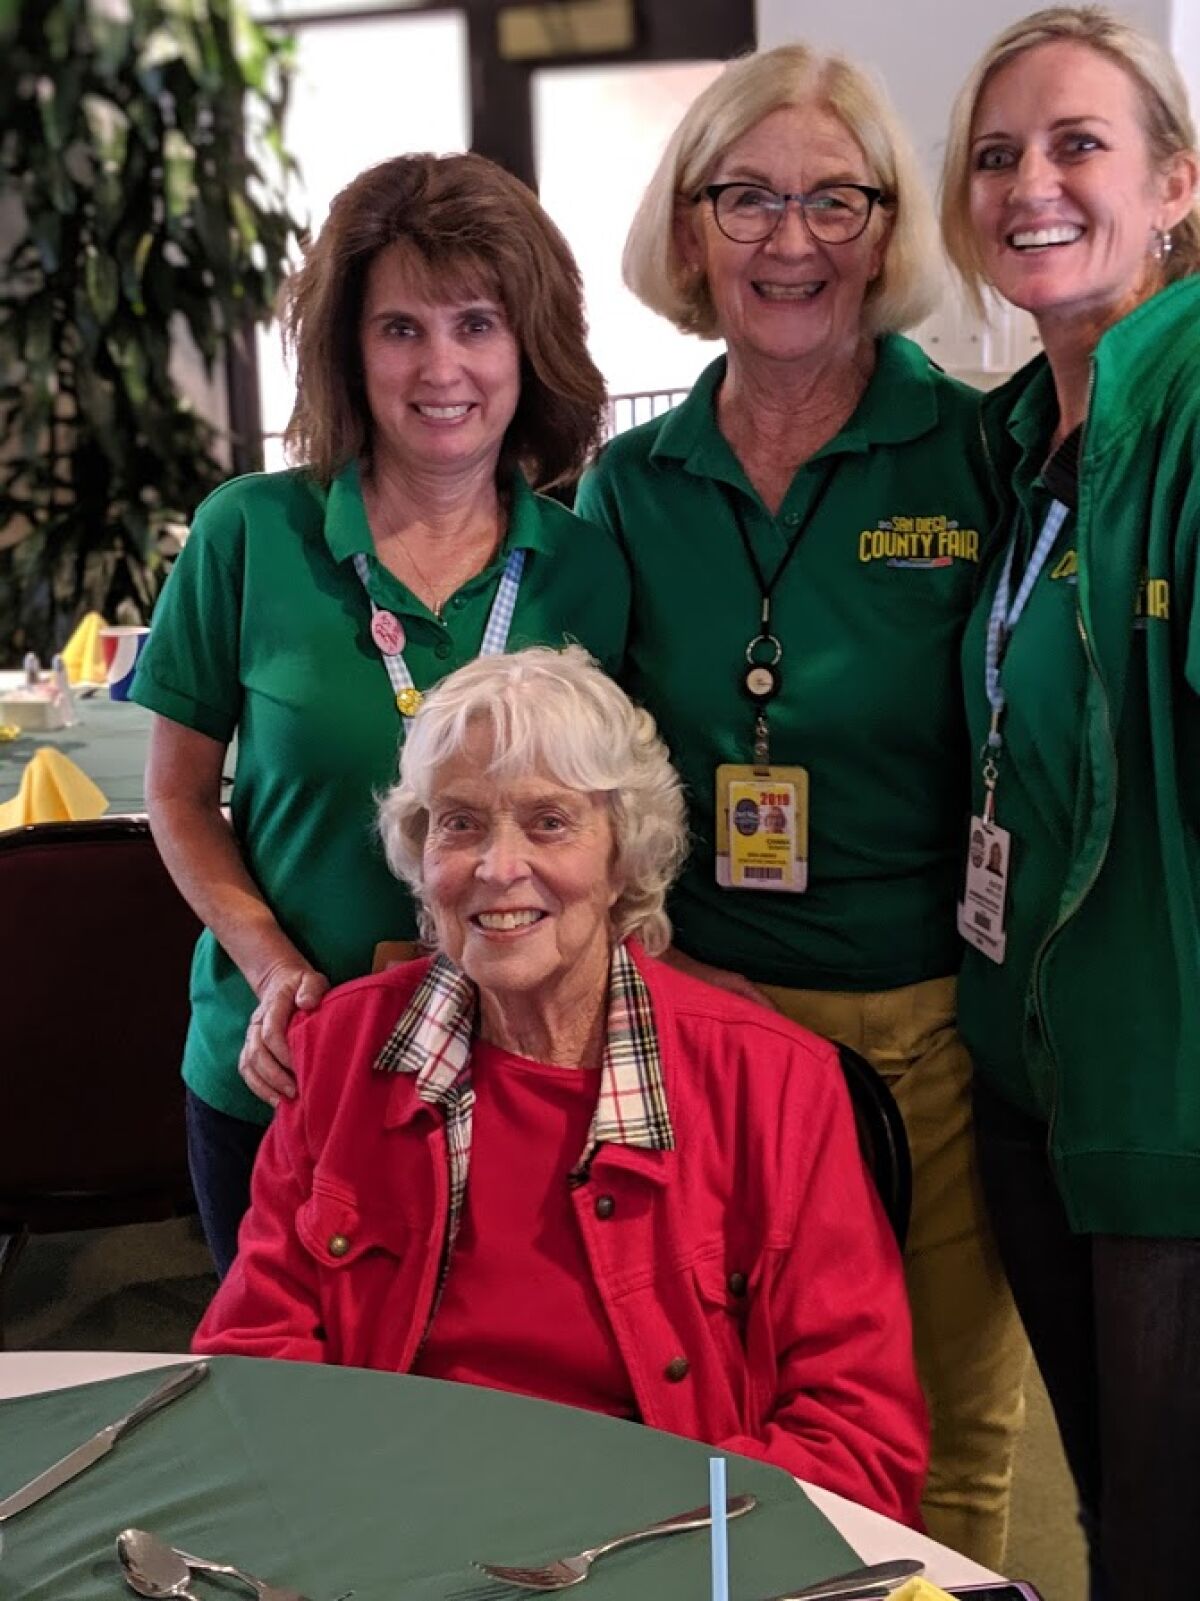 Seated: Jill Coughlin. Standing: Jackie Esheby, exhibit director; Don Diego Scholarship Foundation Executive Director Chana Mannen, who created Plant*Grow*Eat; Katie Mueller, Del Mar Fairgrounds deputy manager.<br>